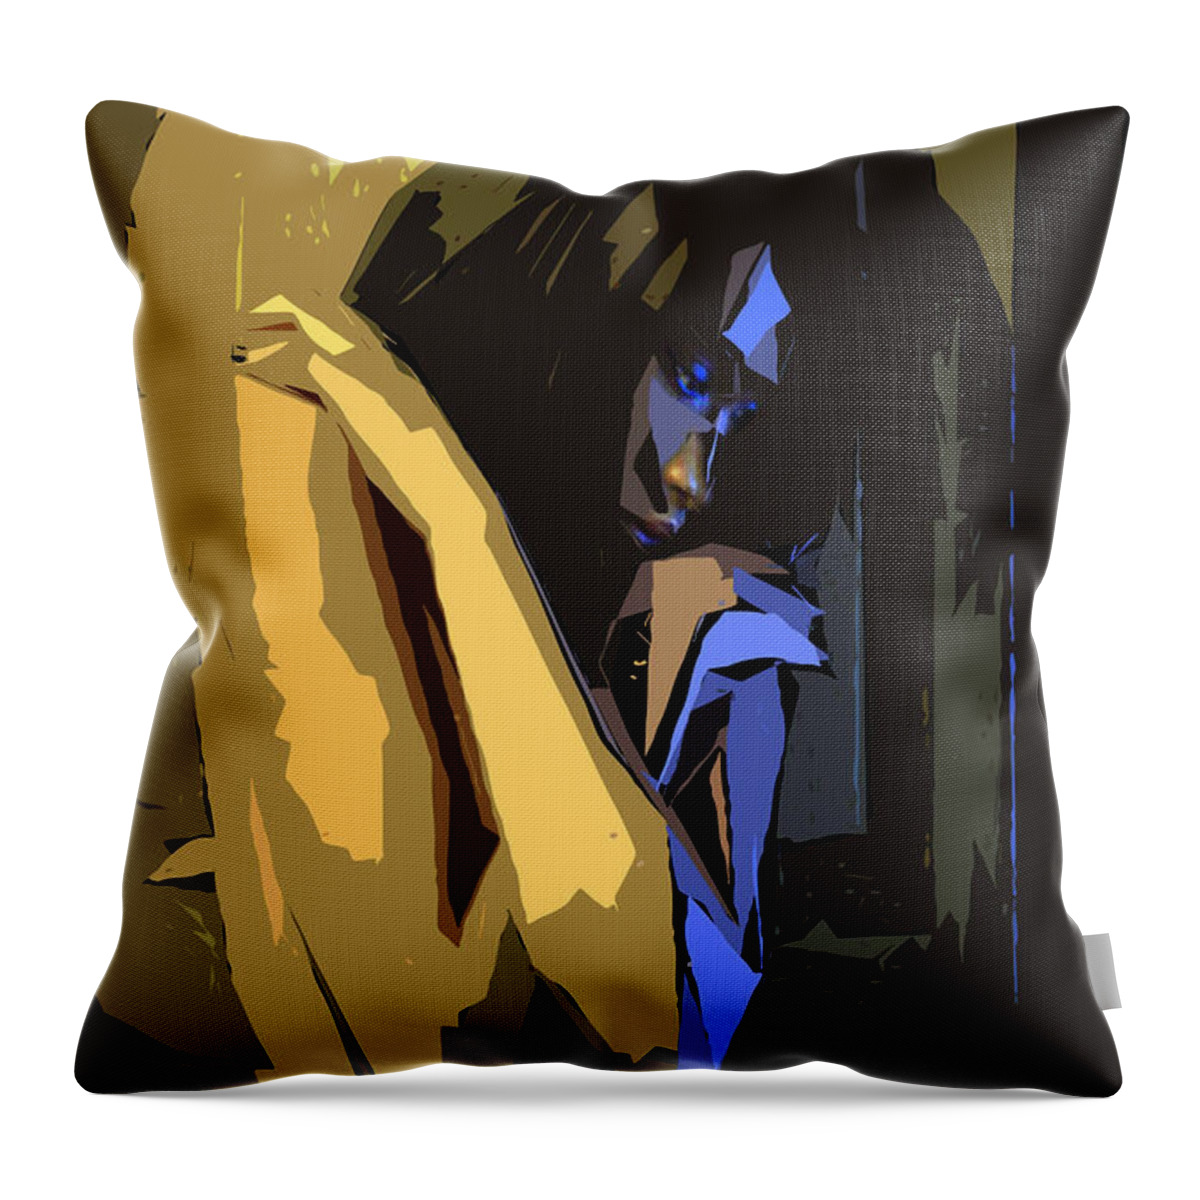 You Are Not Alone Throw Pillow featuring the digital art You are not alone 24 7 by Rafael Salazar